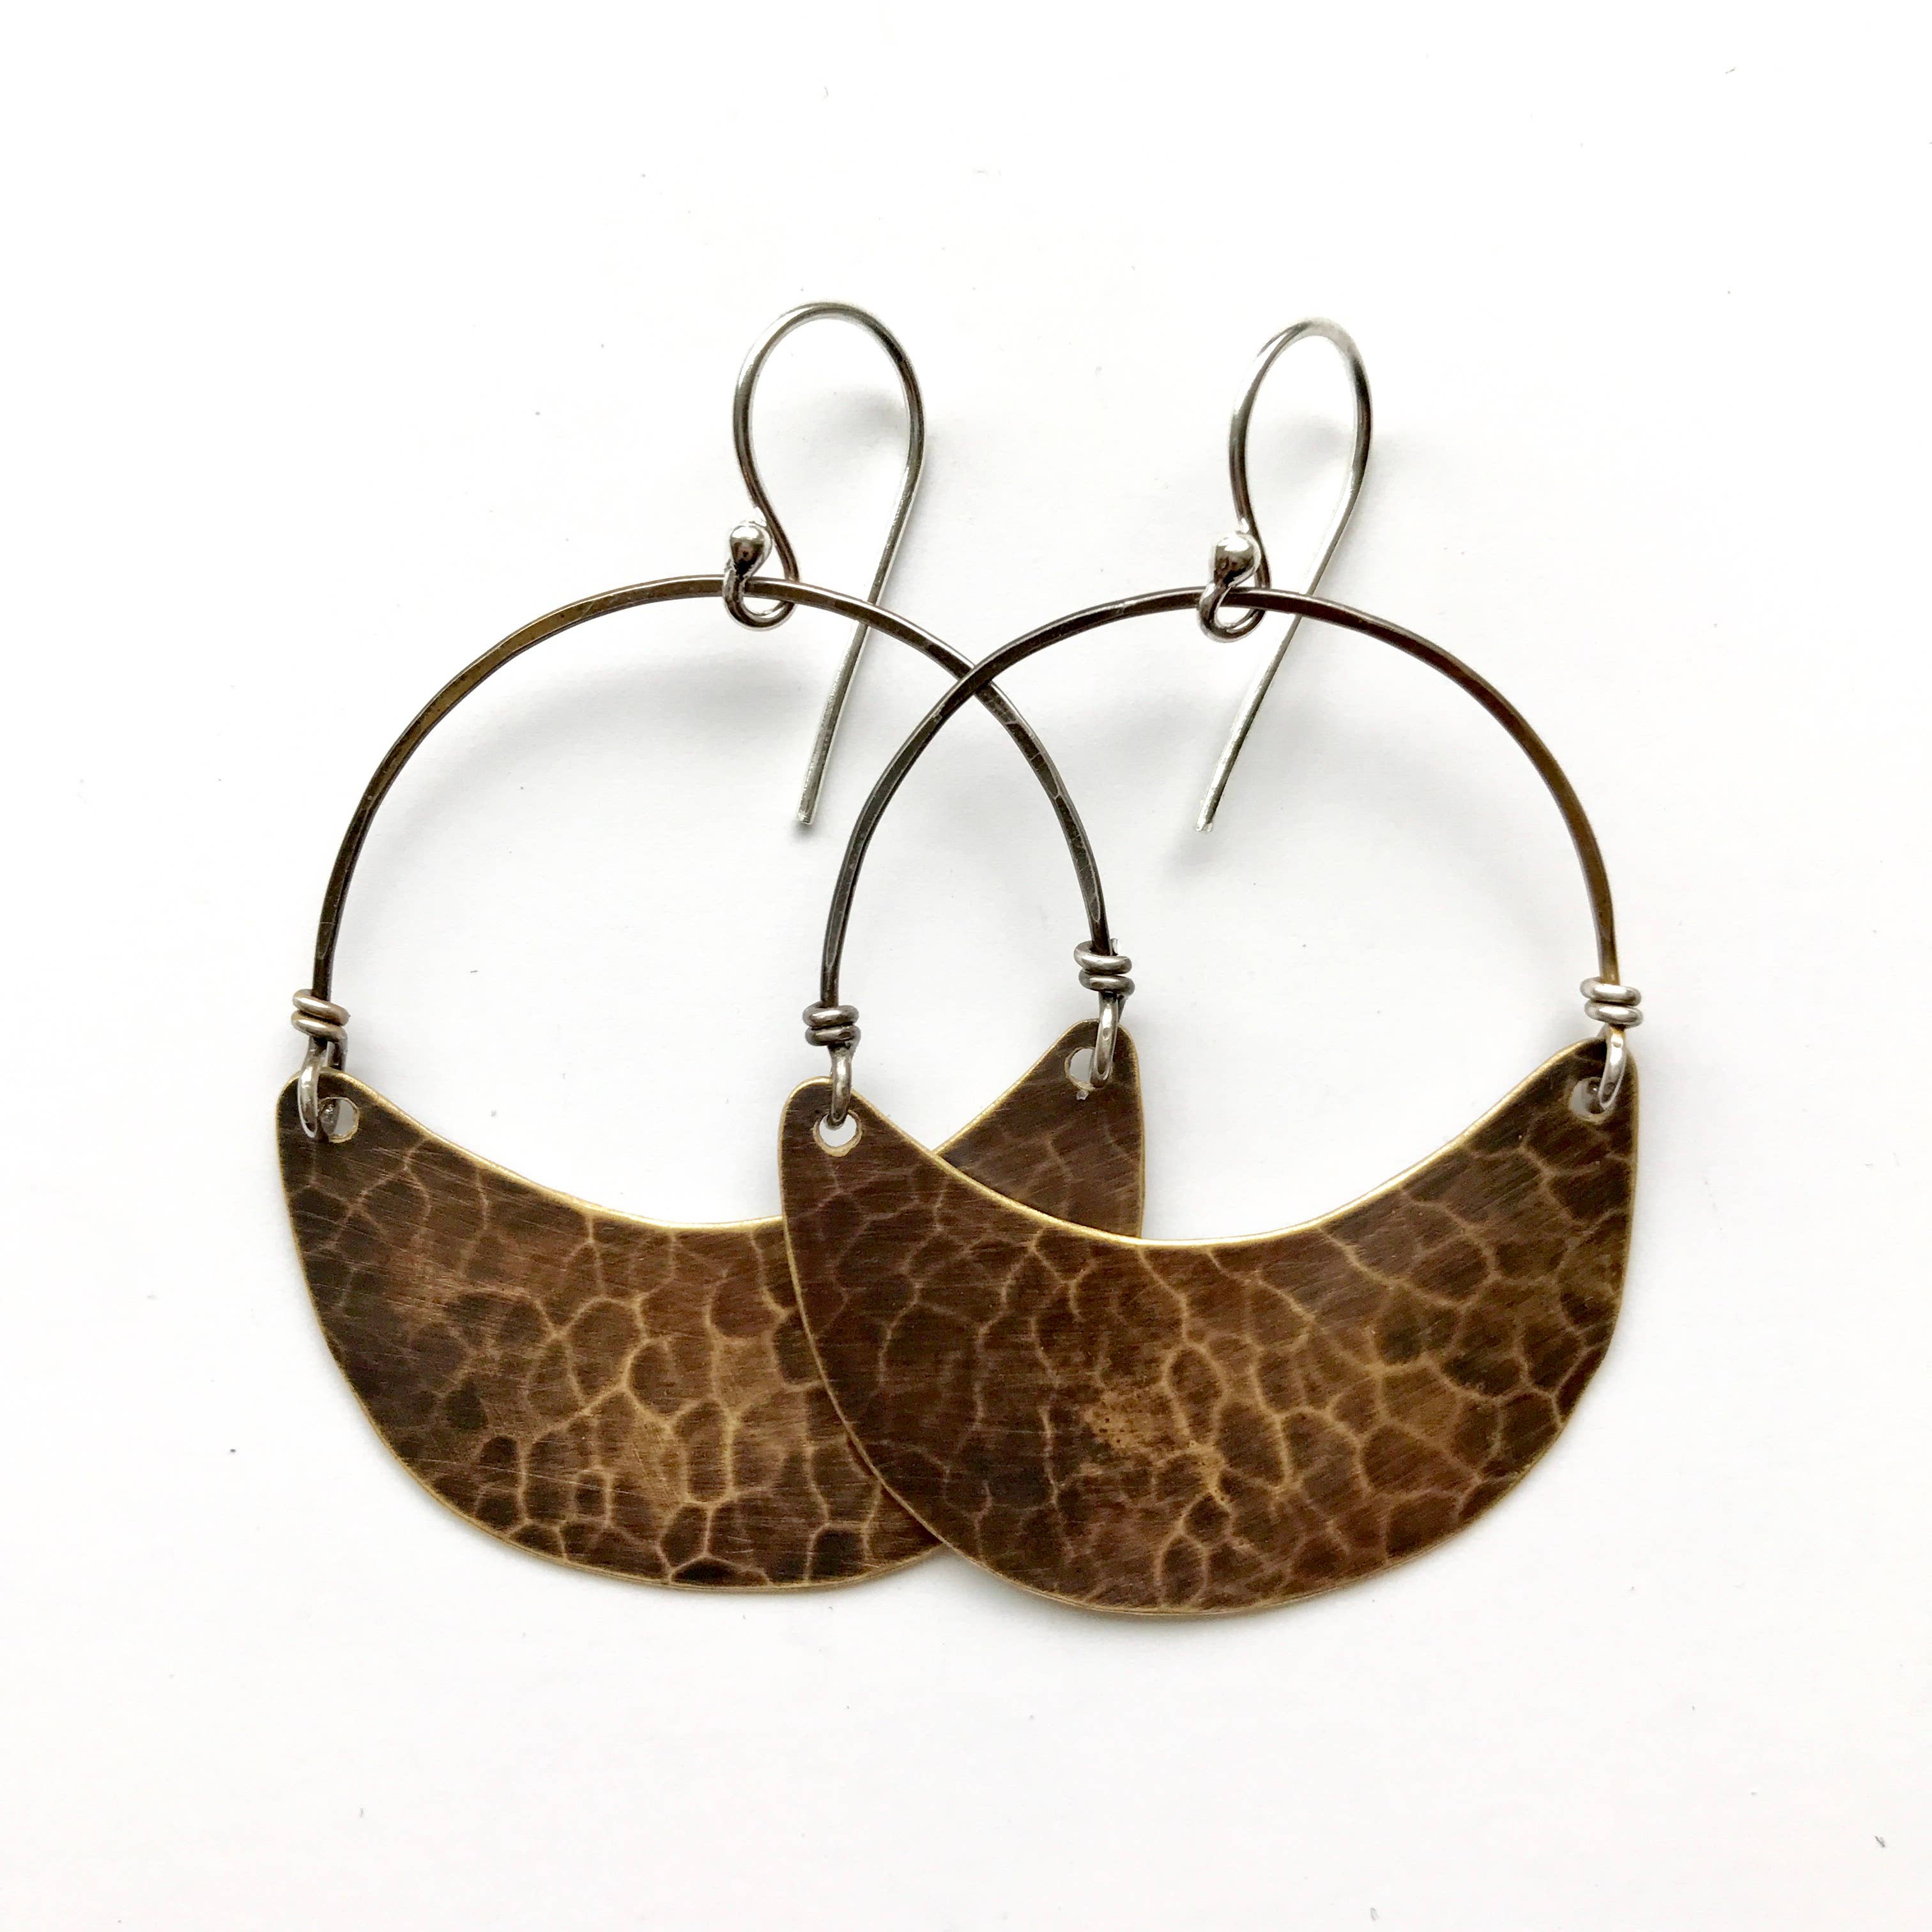 Hammered brass and mixed metal cresent moon earrings with smoky quartz